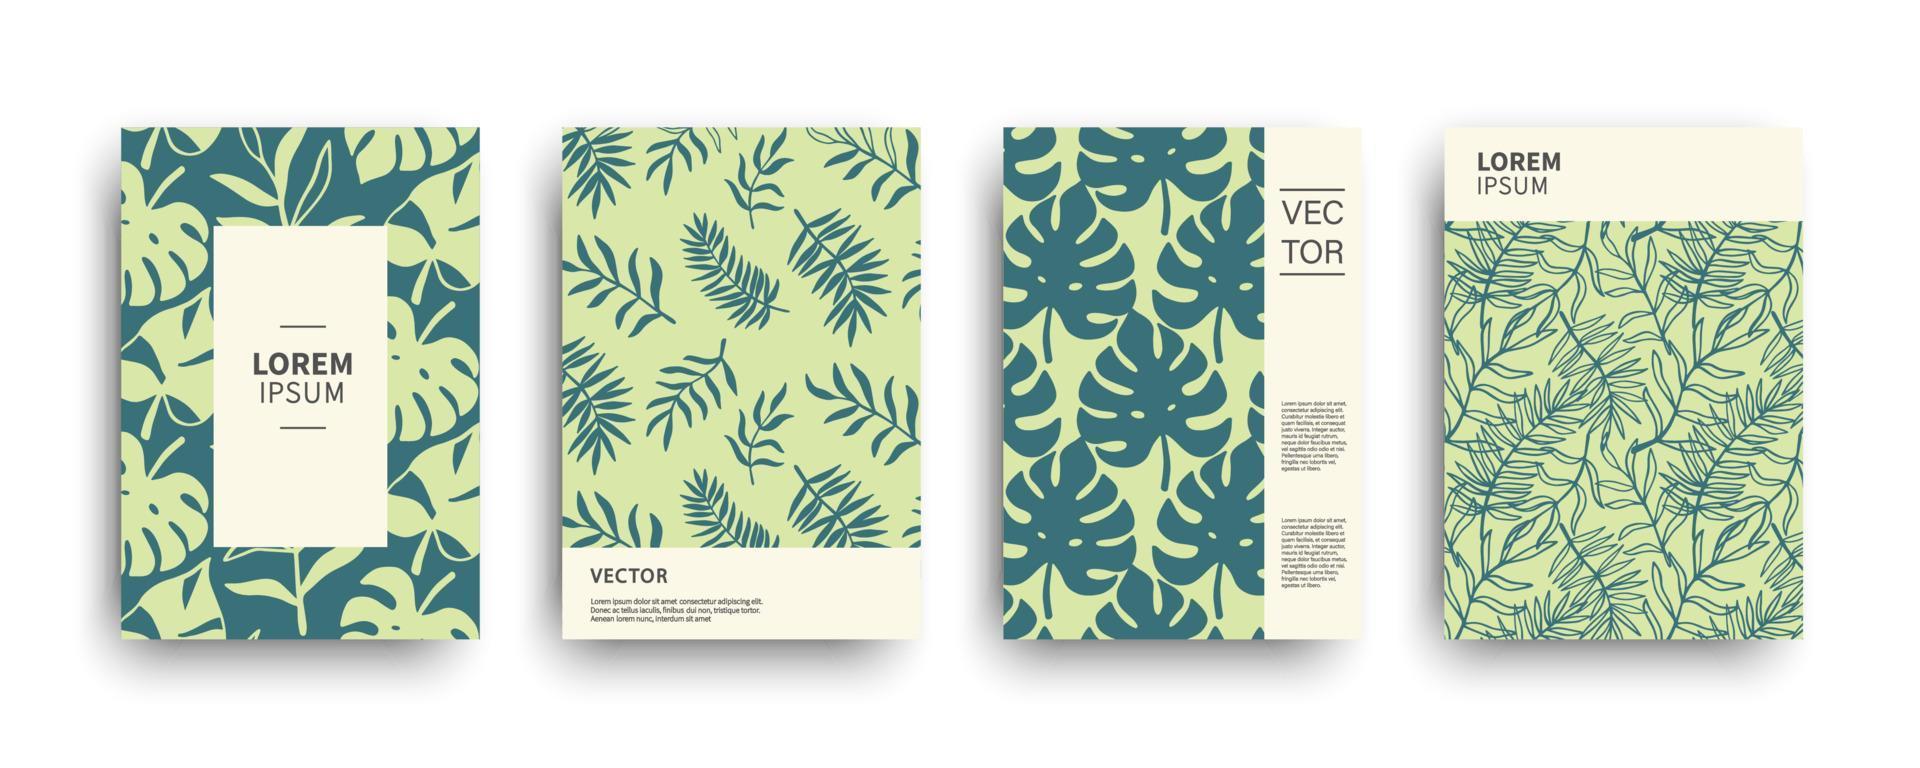 Tropic nature exotic covers set vector